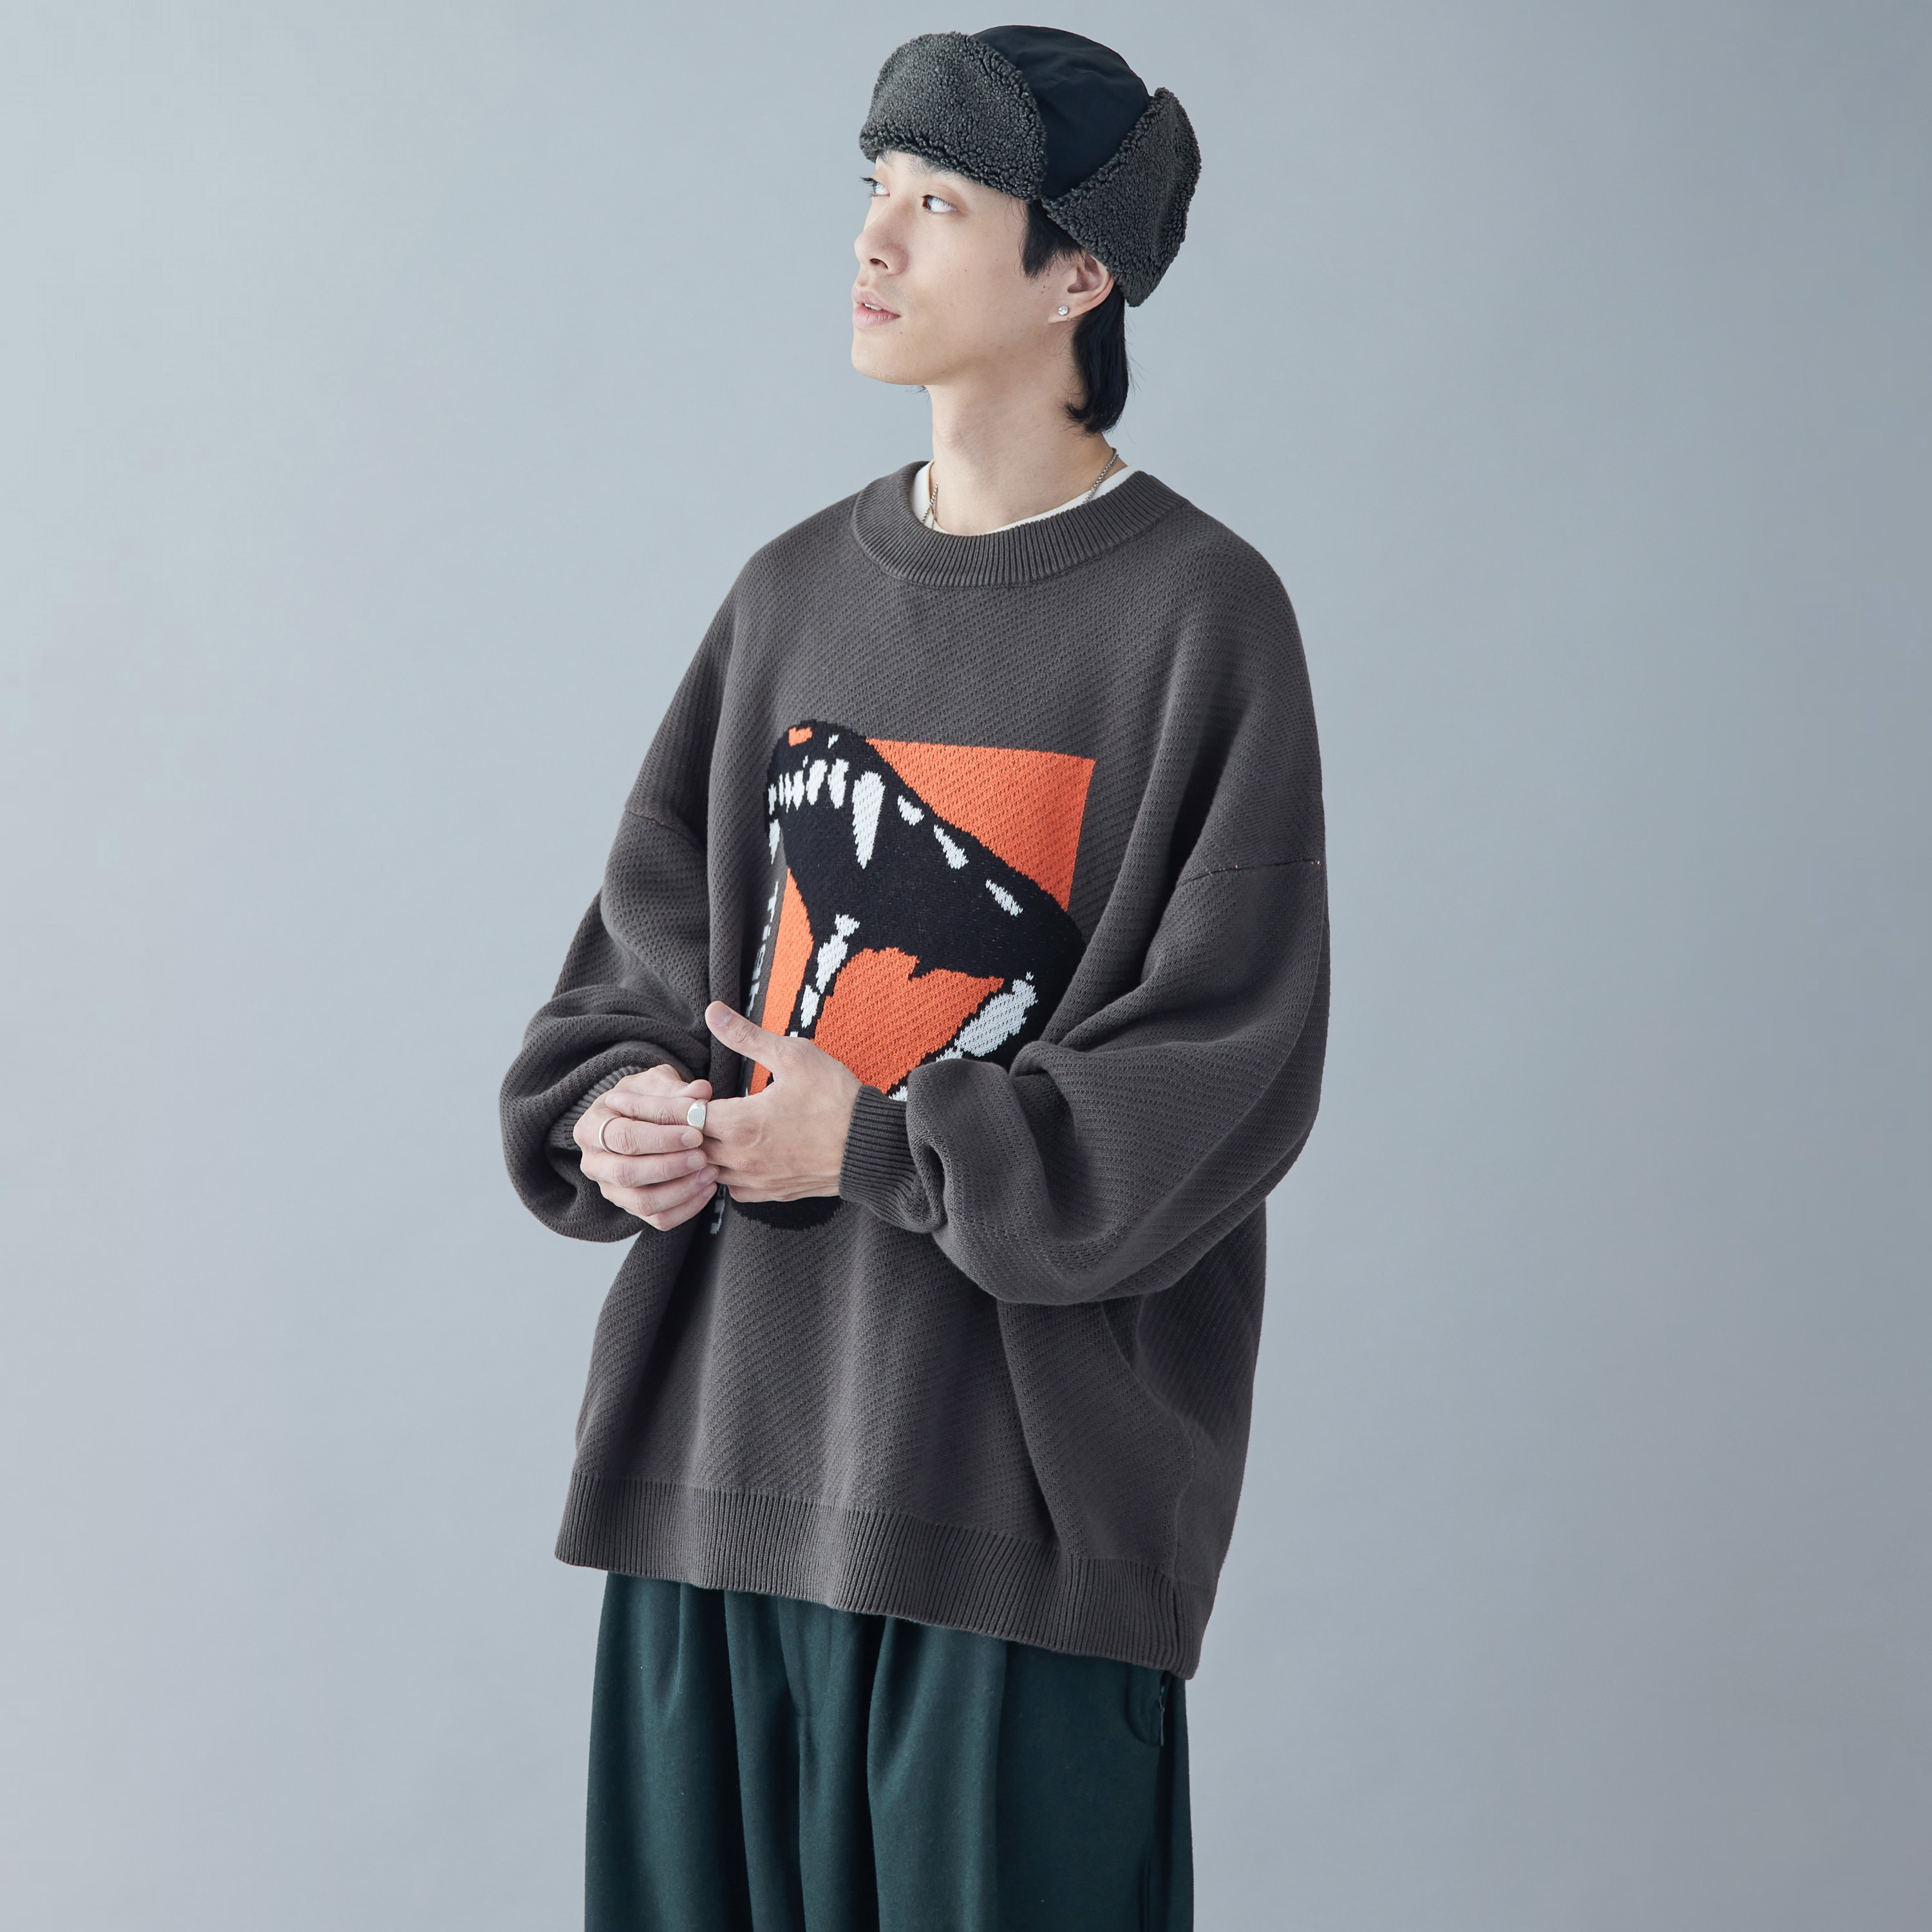 TIGHTBOOTH - Bite Knit Sweater - 2 Colors